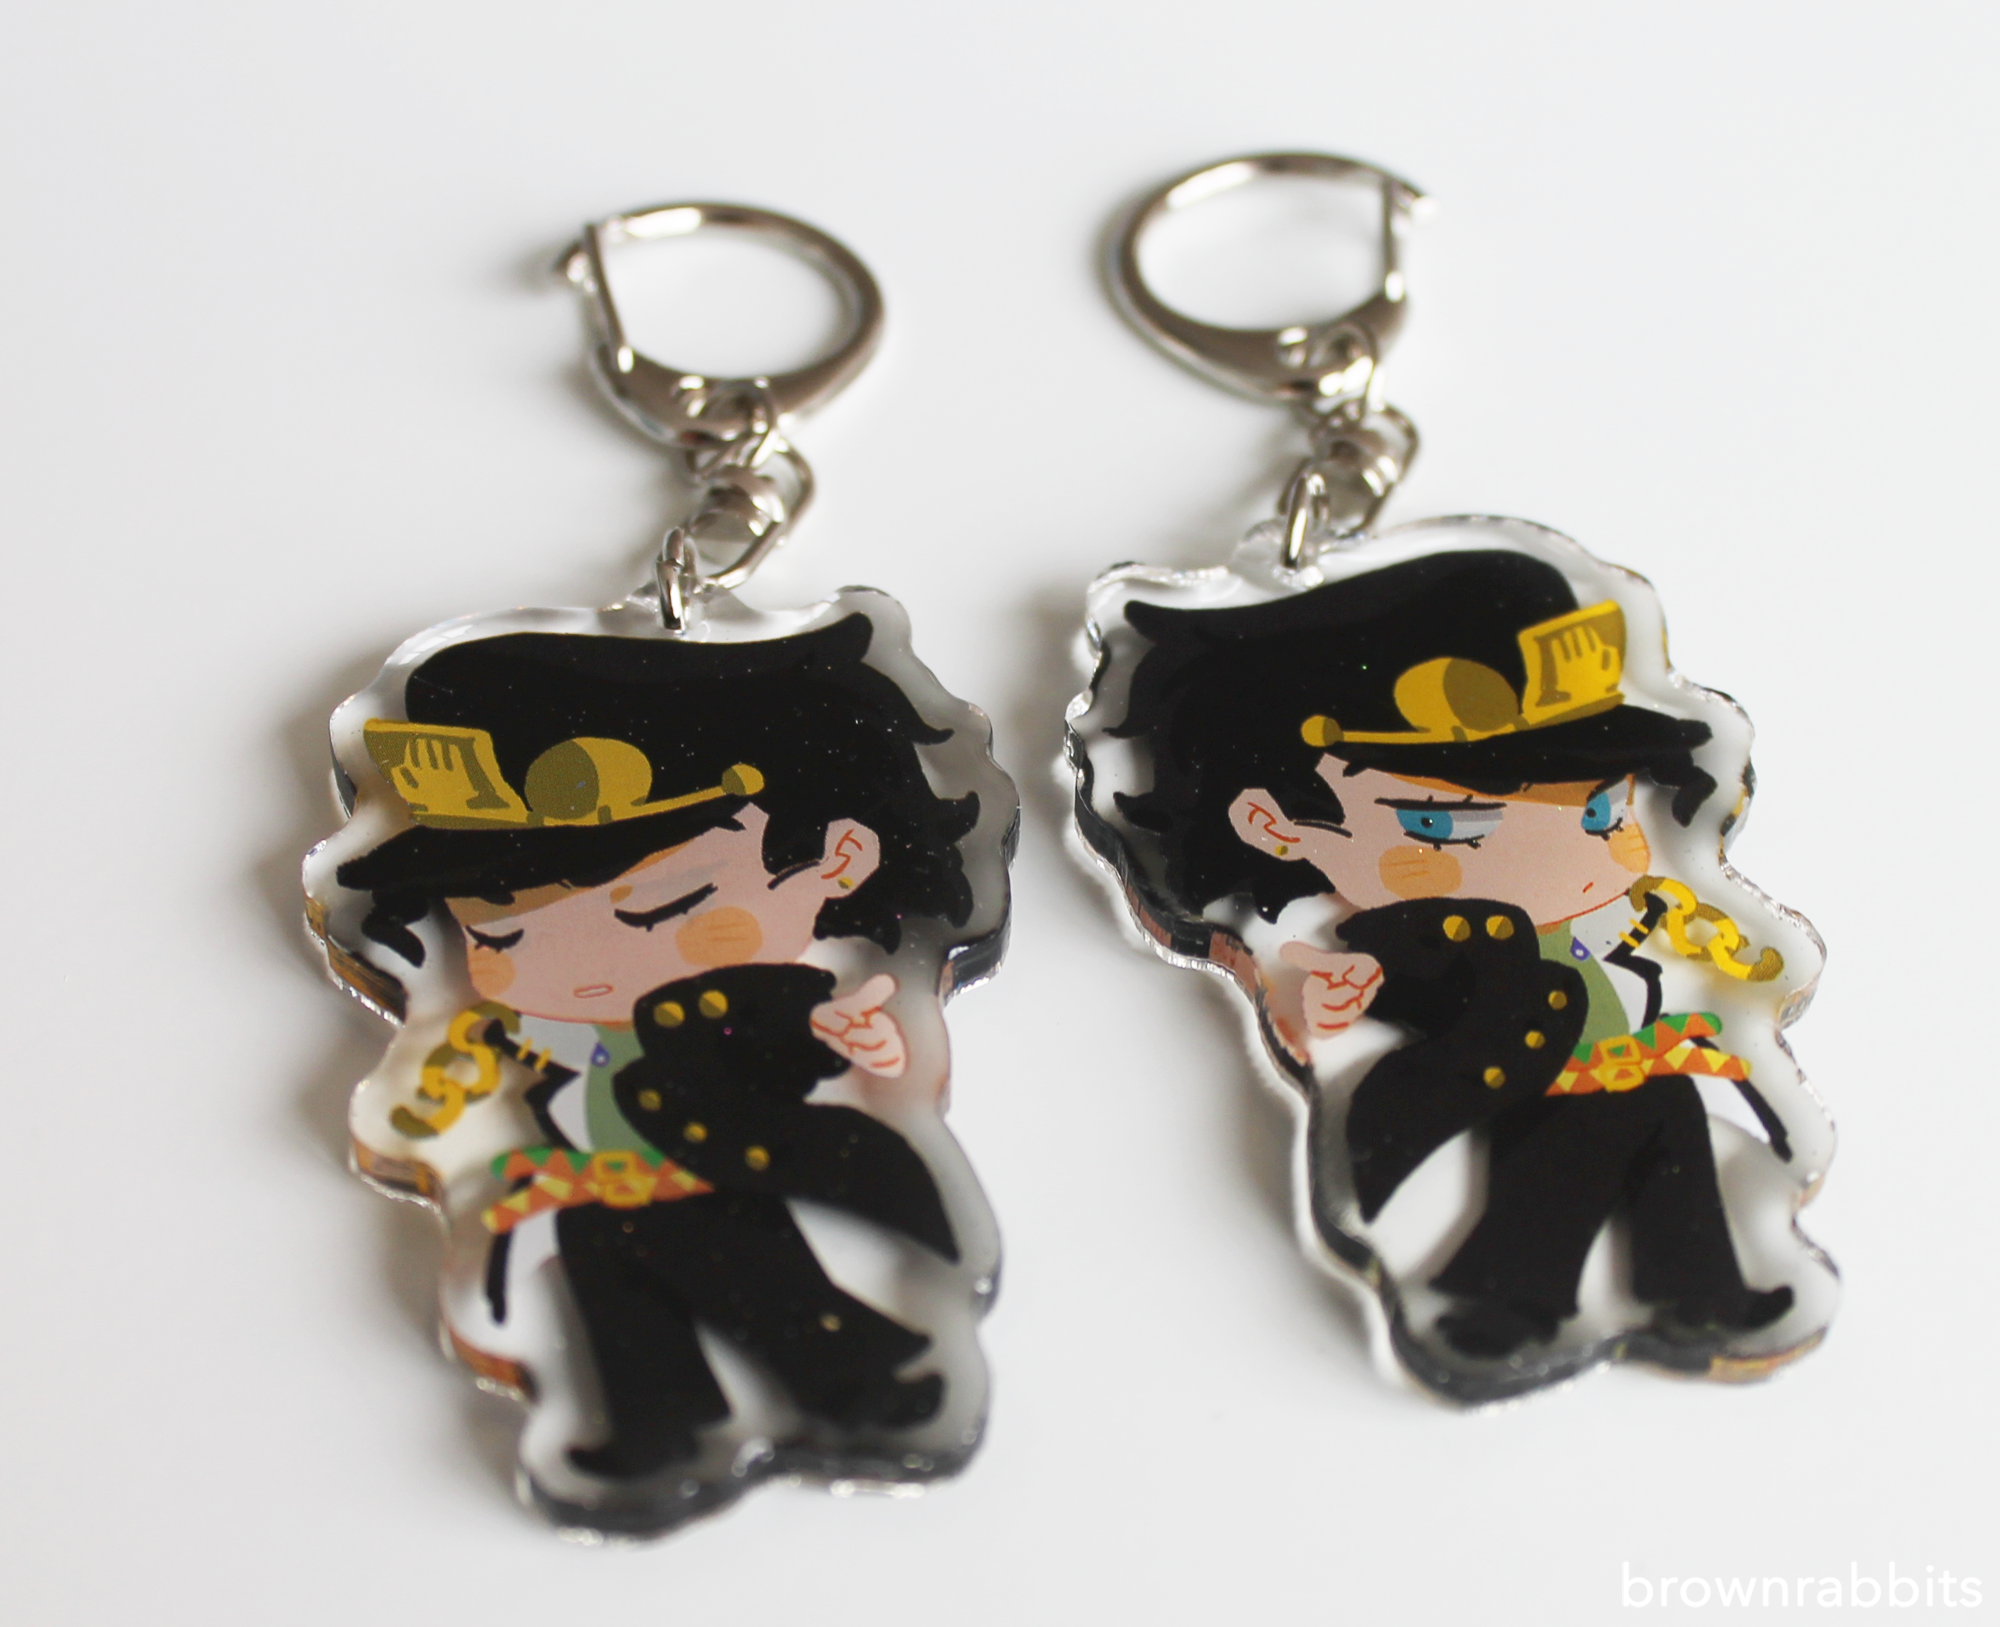 Jotaro Kujo charm design! I AM MAKING MORE ACRYLIC CHARMS!!! Thank you to  all who voted on what designs to do first! I decided to mainly…